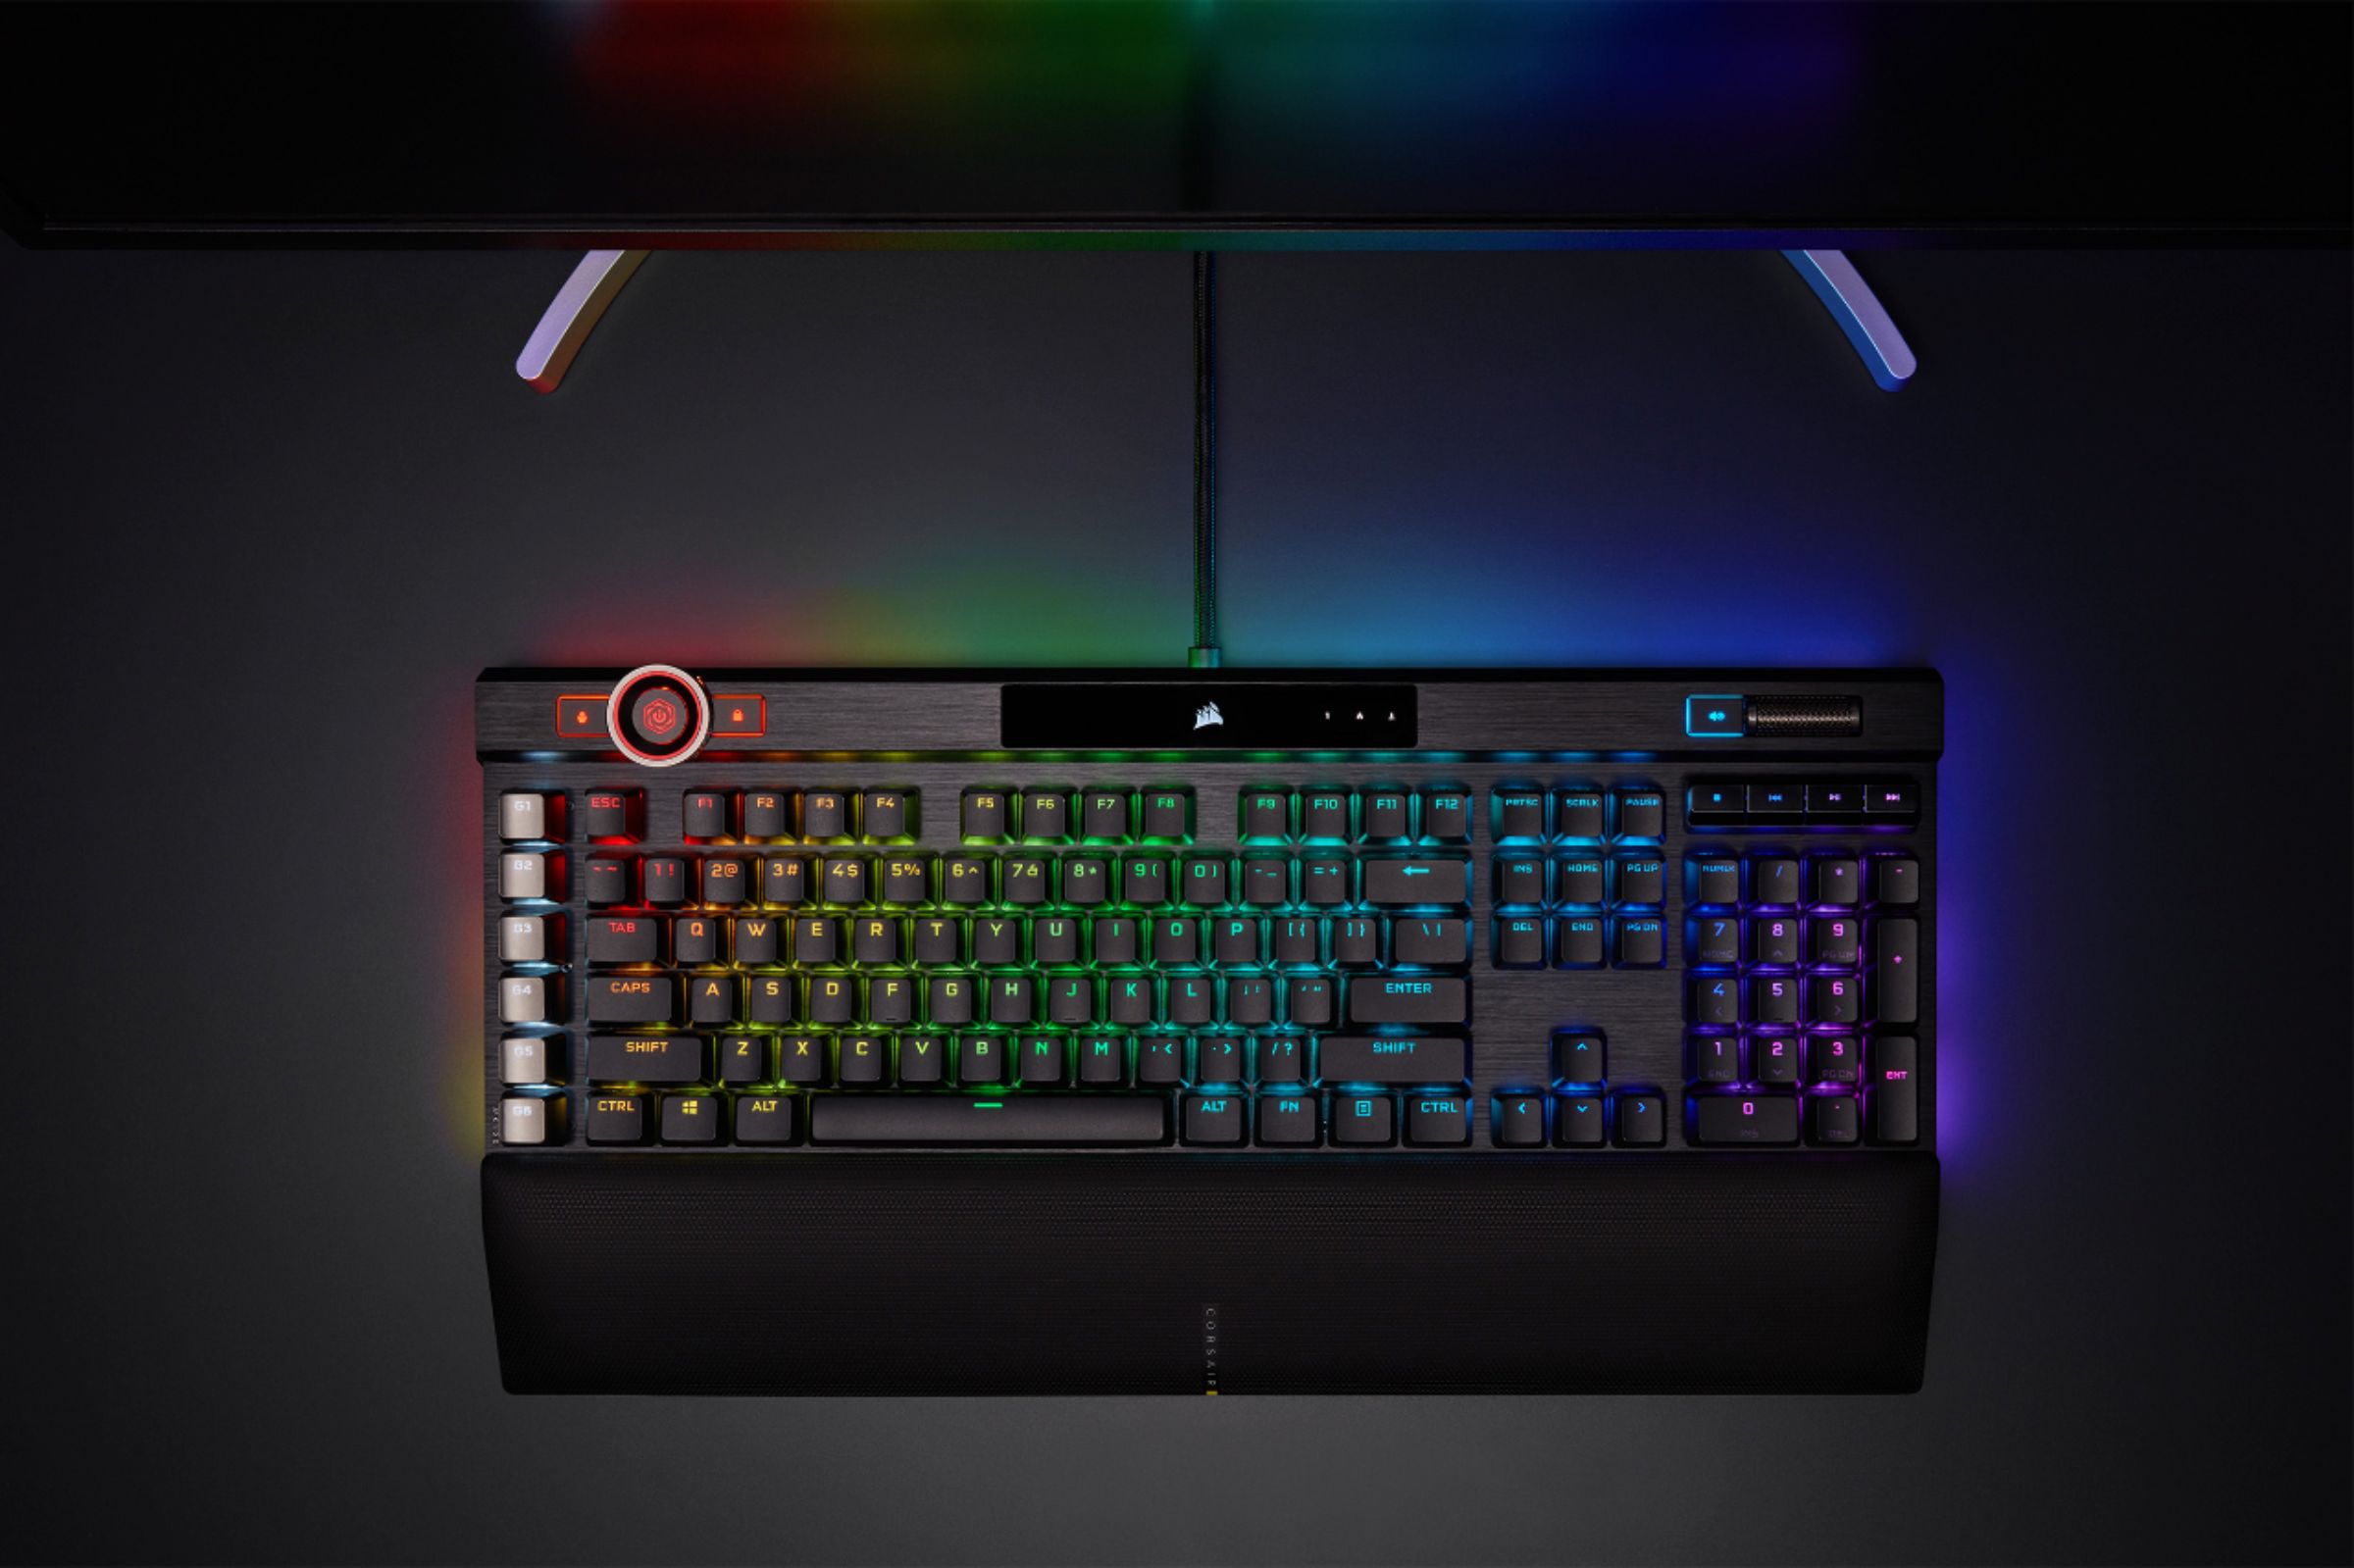 CORSAIR K100 Full-size Gaming Switch Linear - with Elgato Buy Integration Best Deck CH-912A01A-NA Mechanical OPX RGB Keyboard Wired Software Black Stream